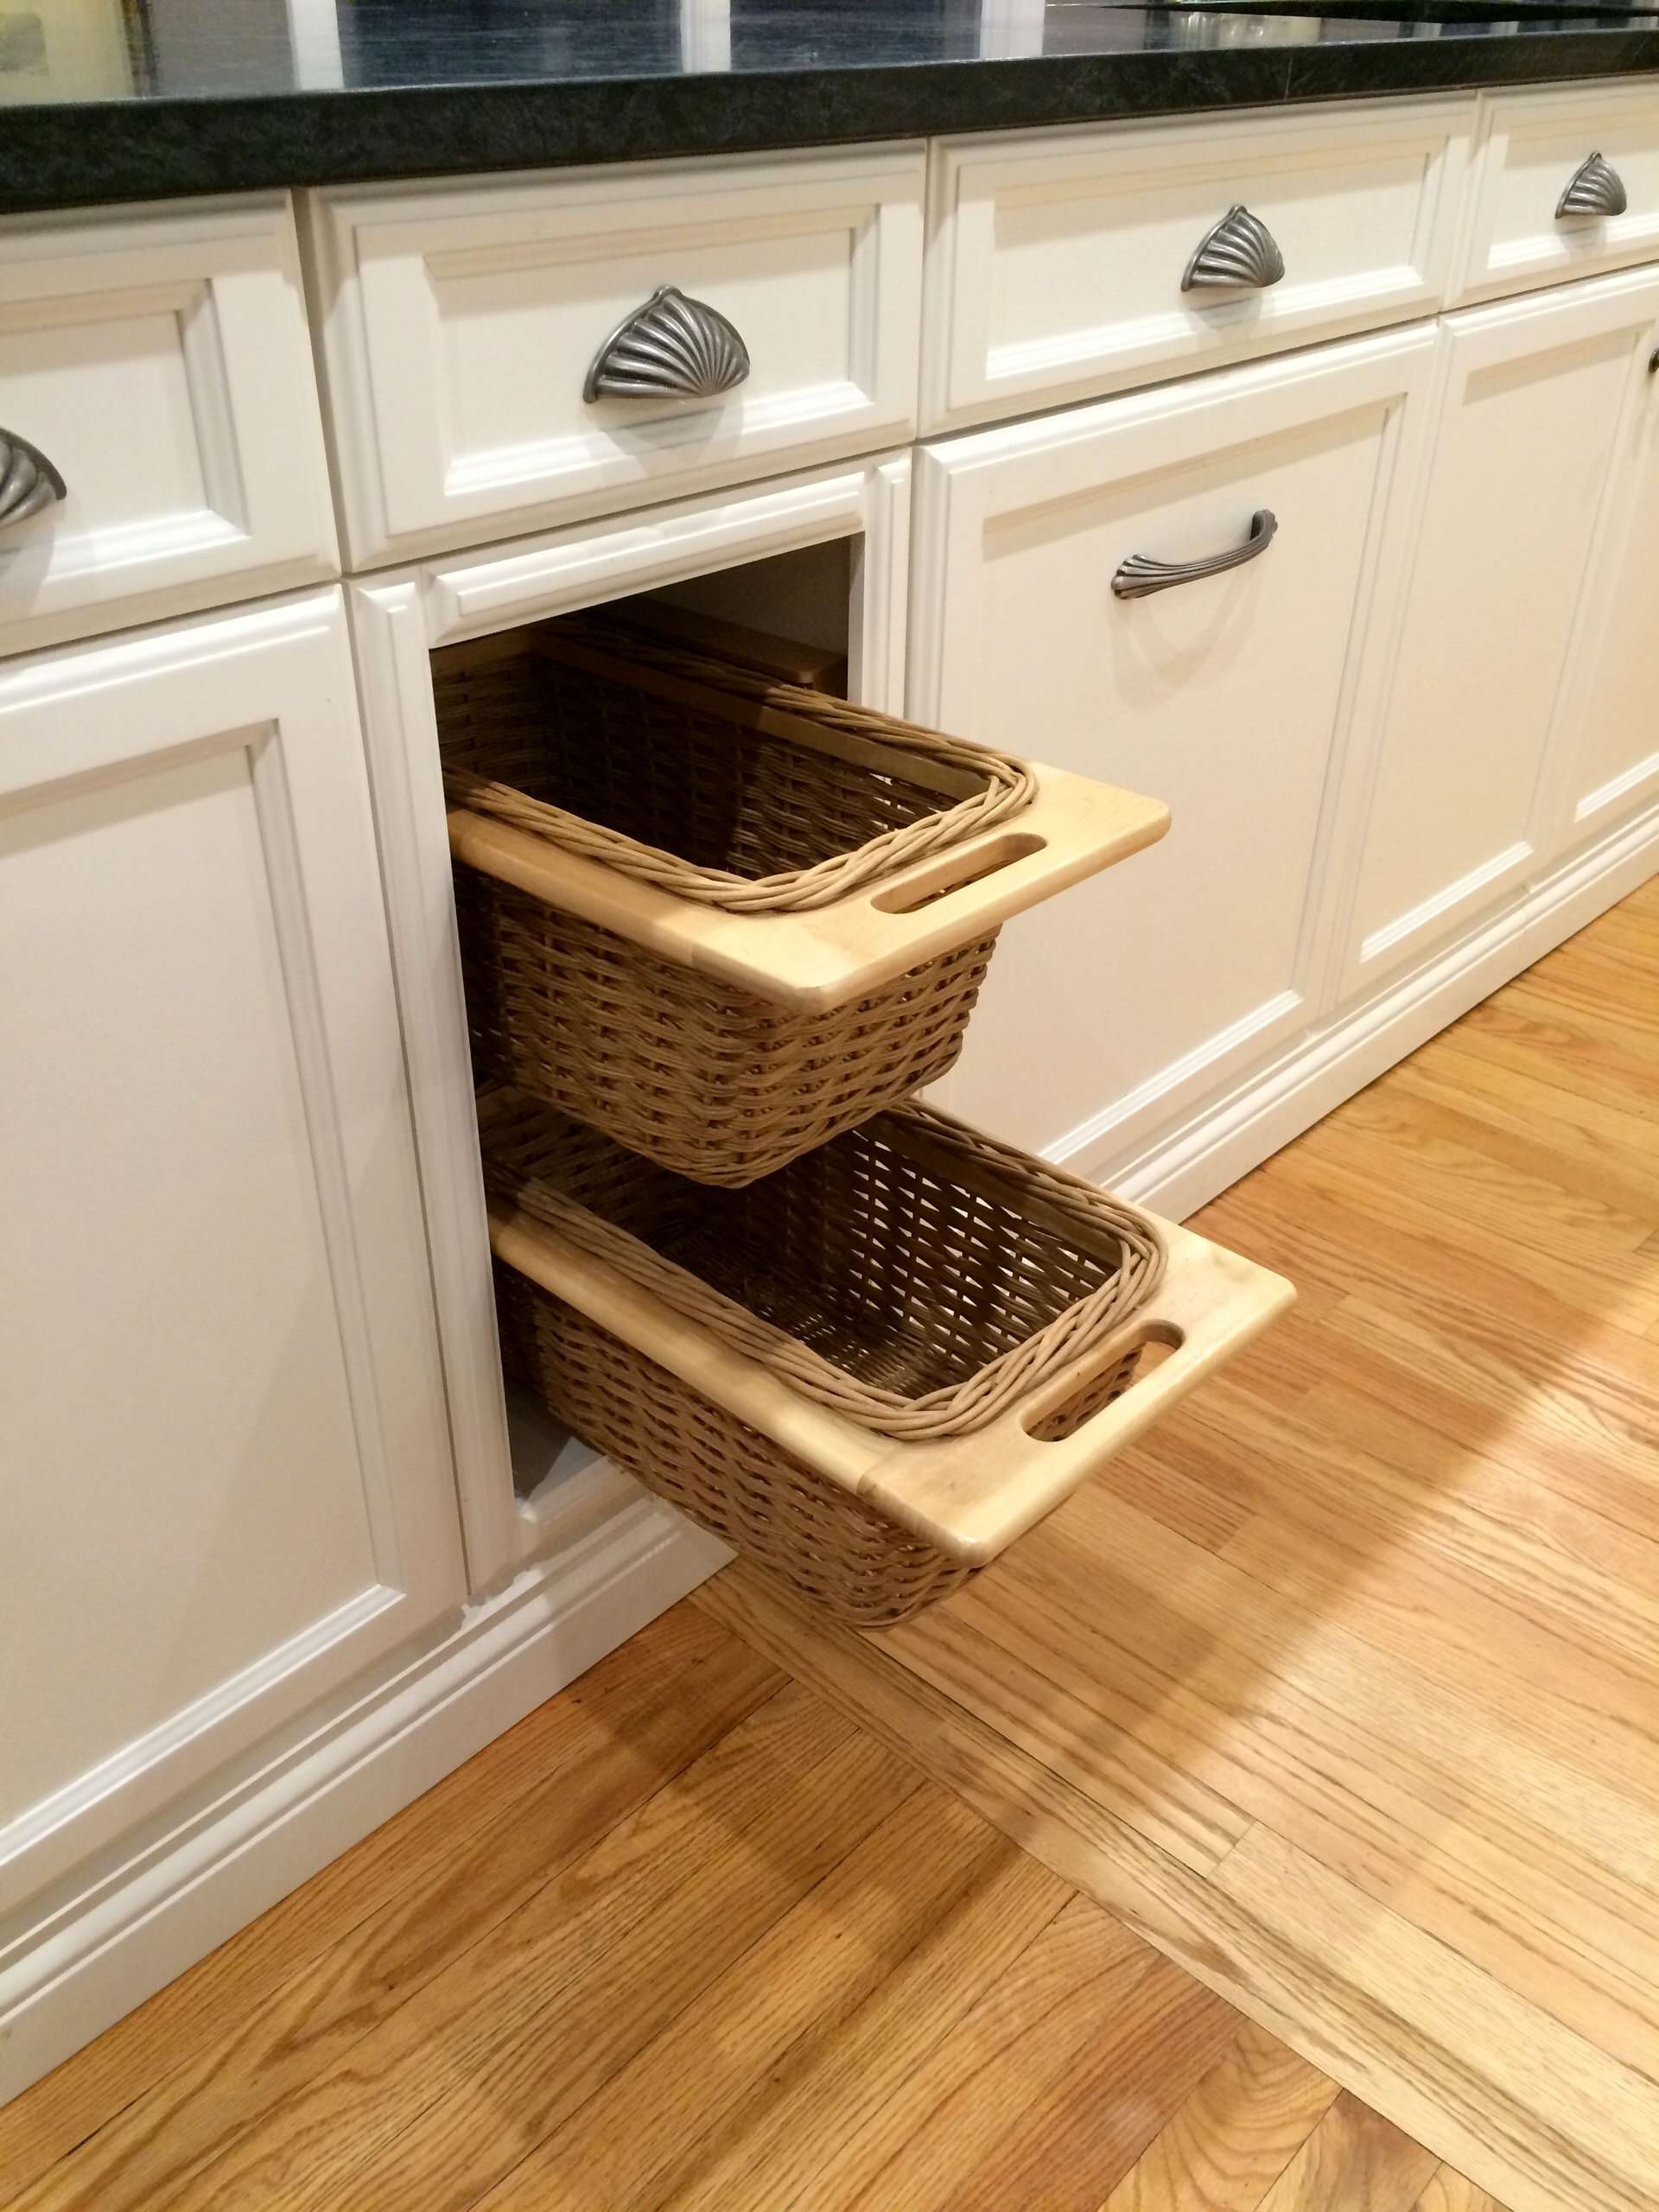 Hafele Pull-out Vegetable Baskets - Contemporary - Kitchen - by